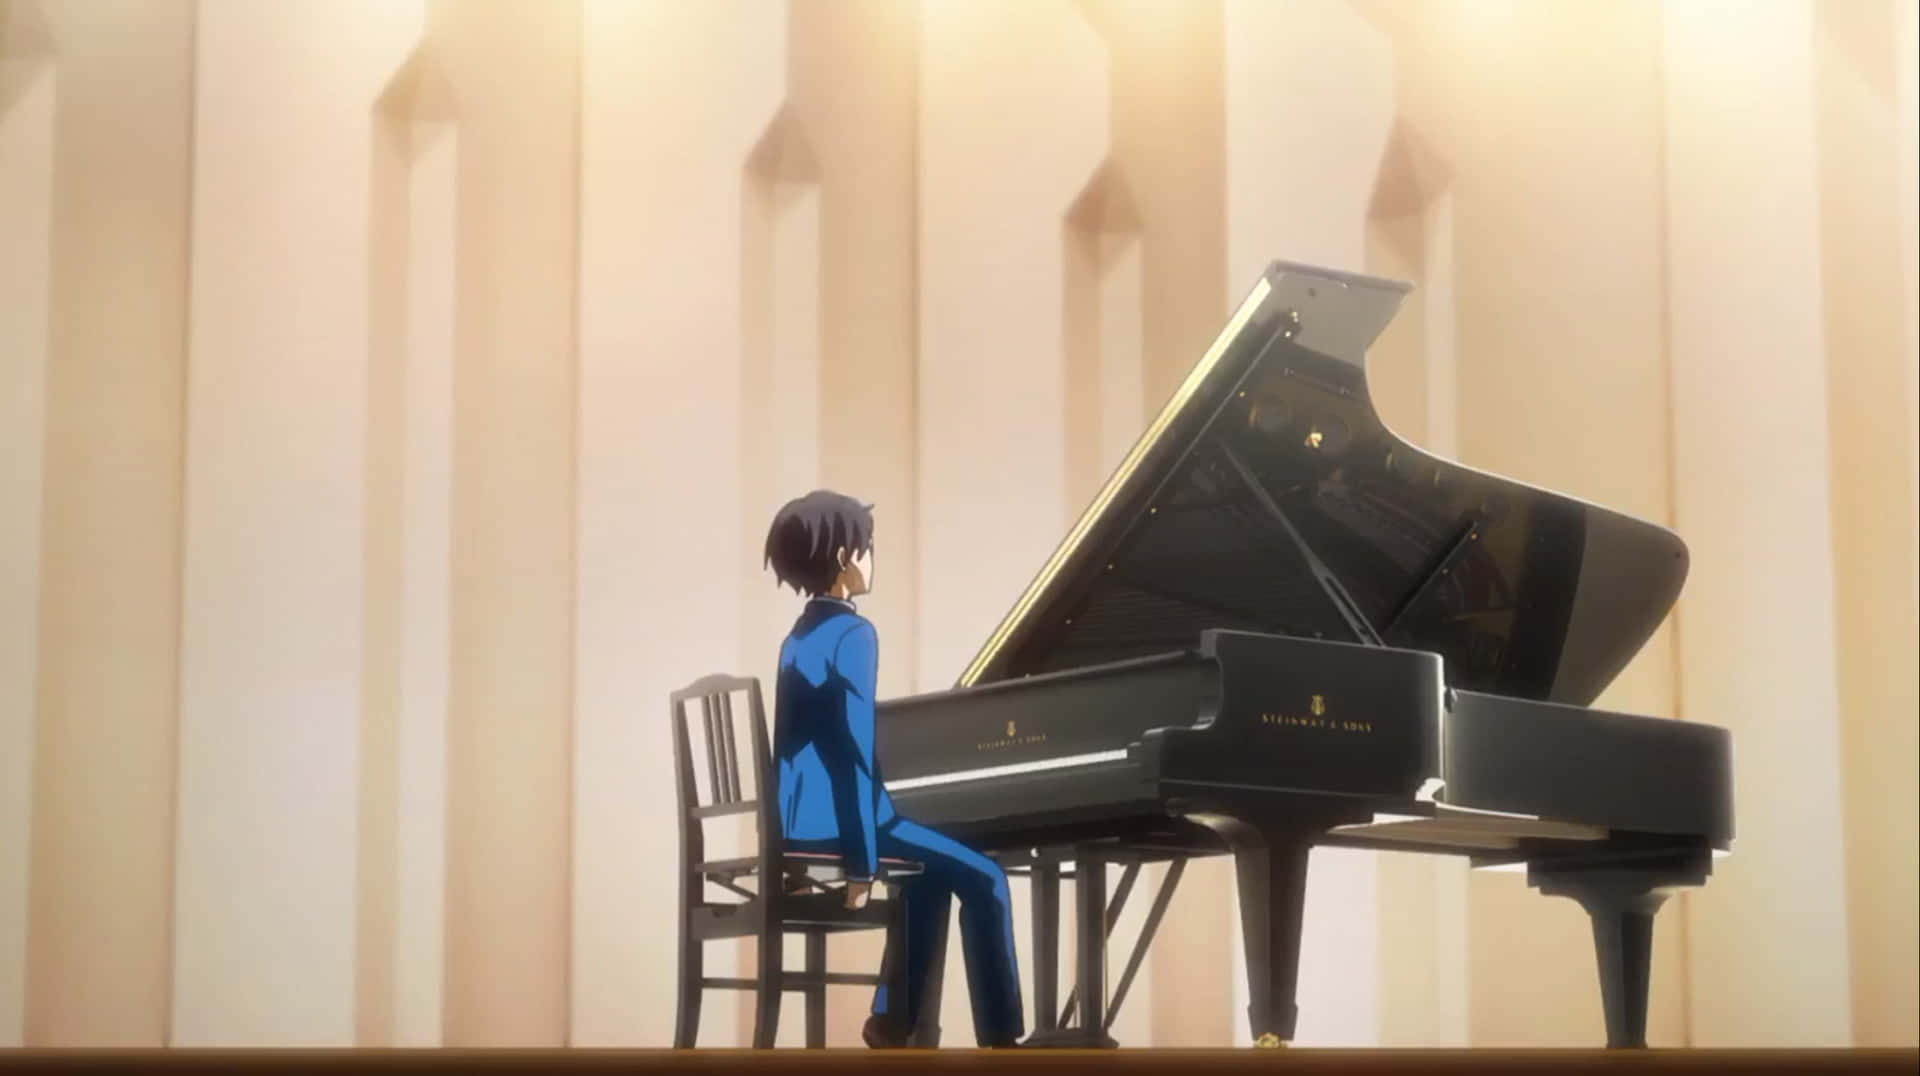 Your Lie In April - Emotional Piano Scene Wallpaper